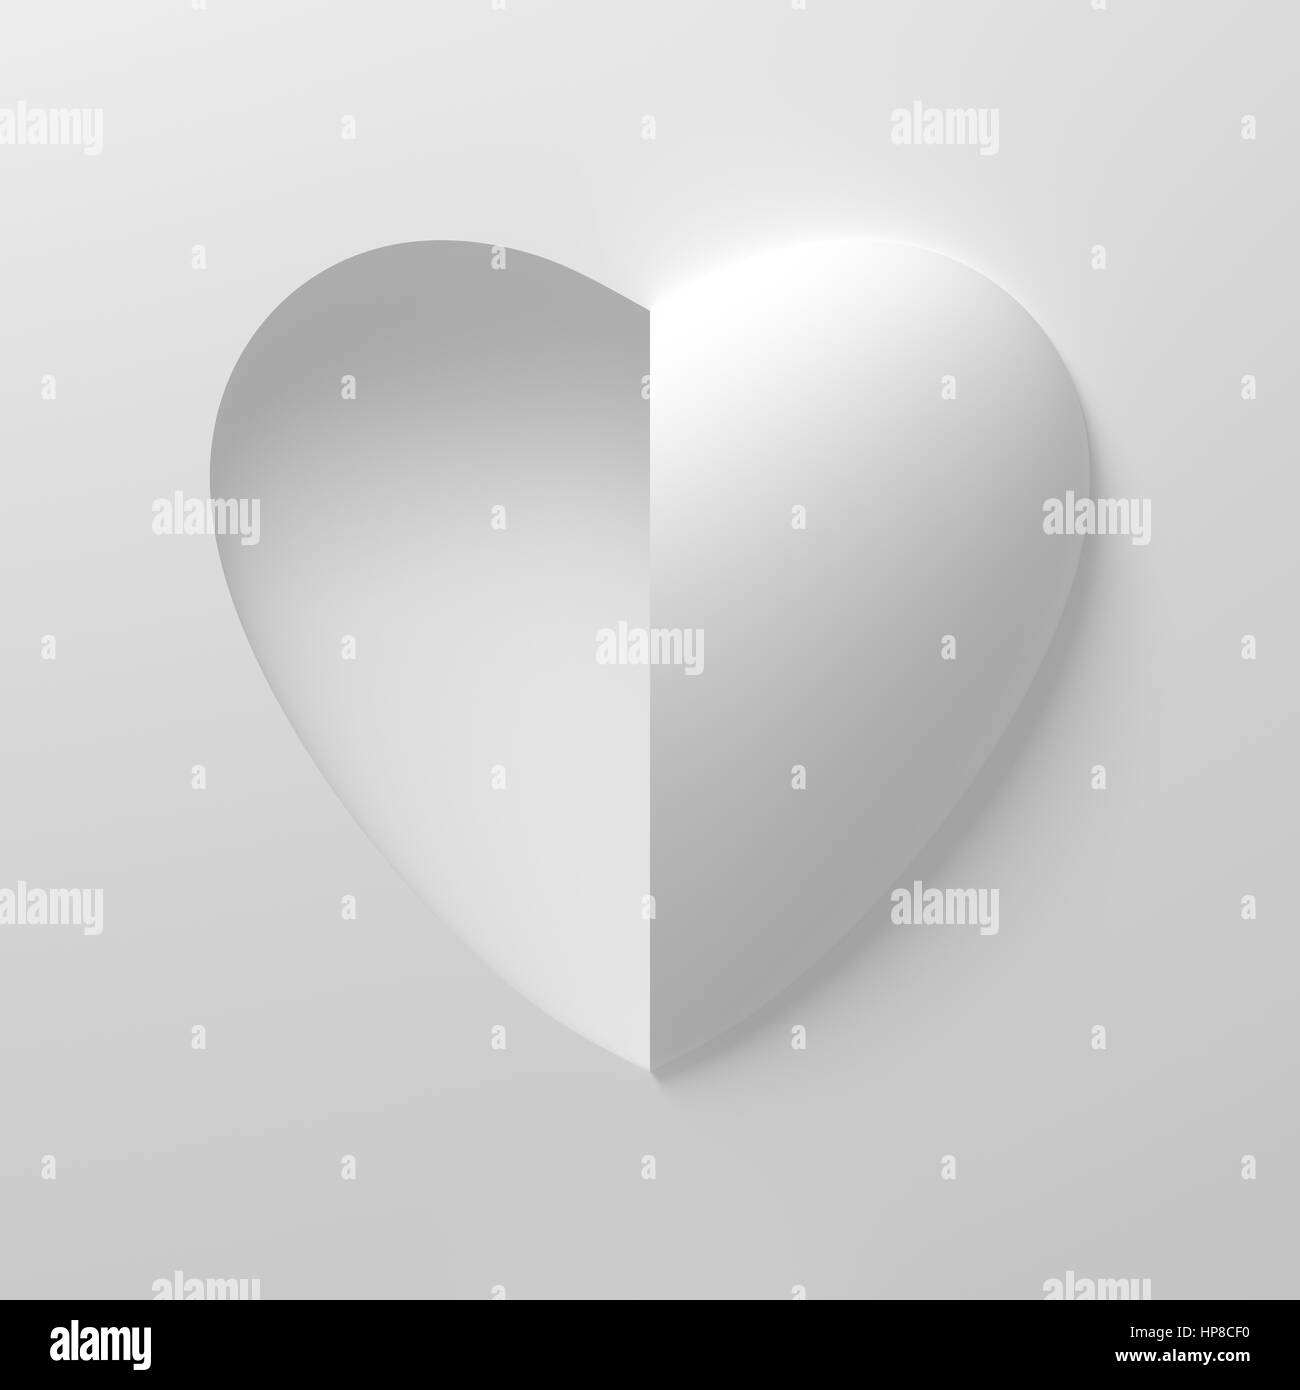 Concept Of White Heart Shape On White Background. One Side Is Concave And The Other Side Is Convex. 3D Illustration. Stock Photo